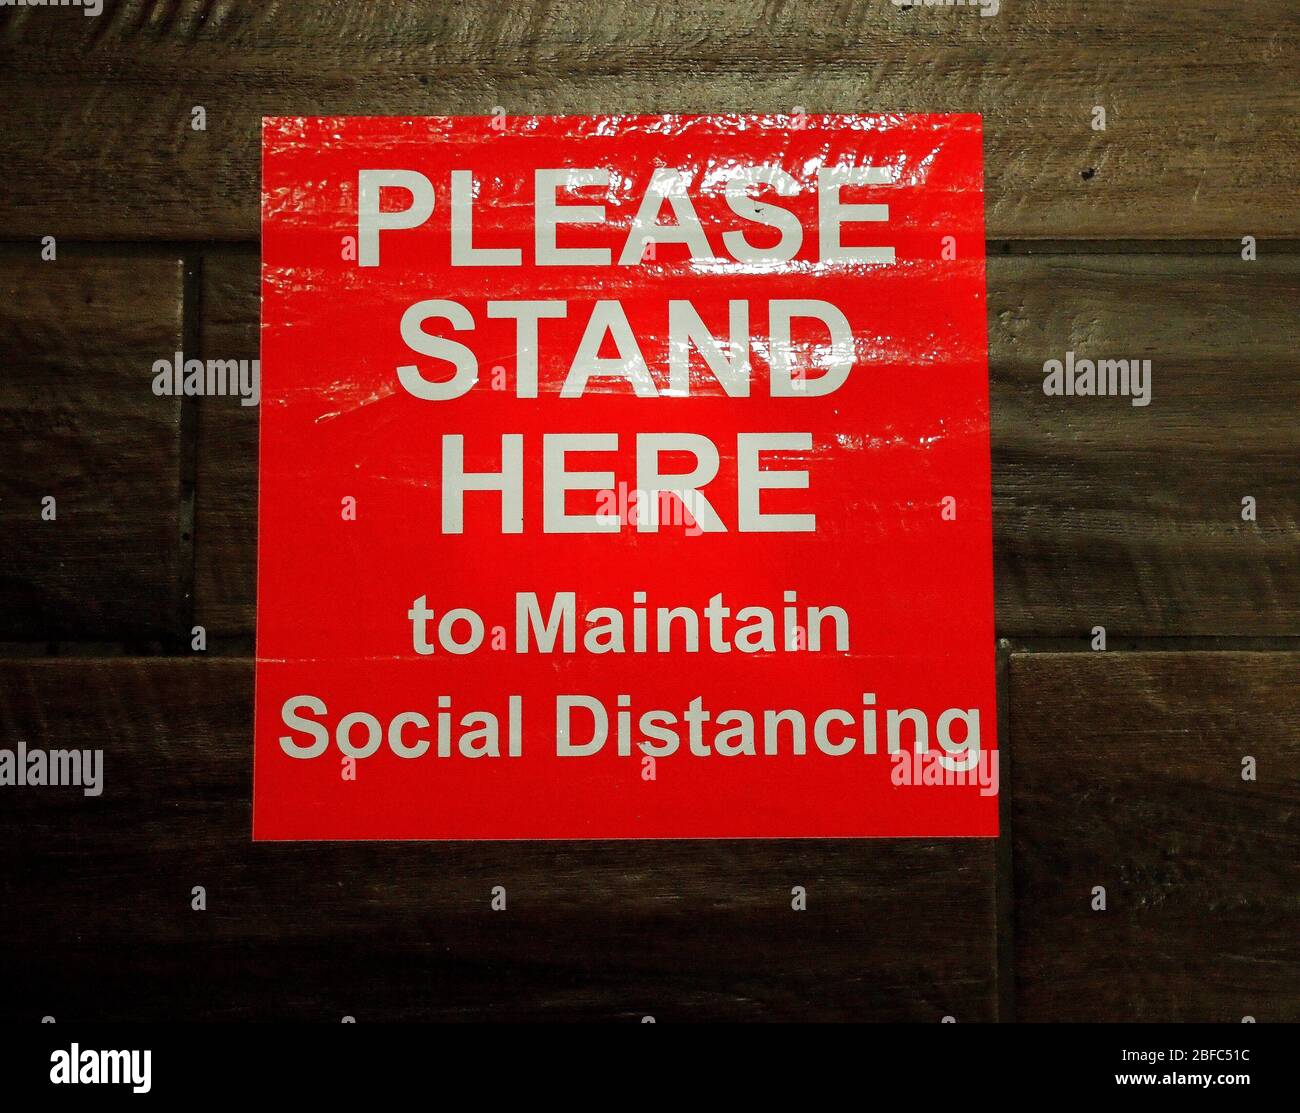 PLEASE STAND HERE to maintain social distancing marker on bank's floor in California Stock Photo